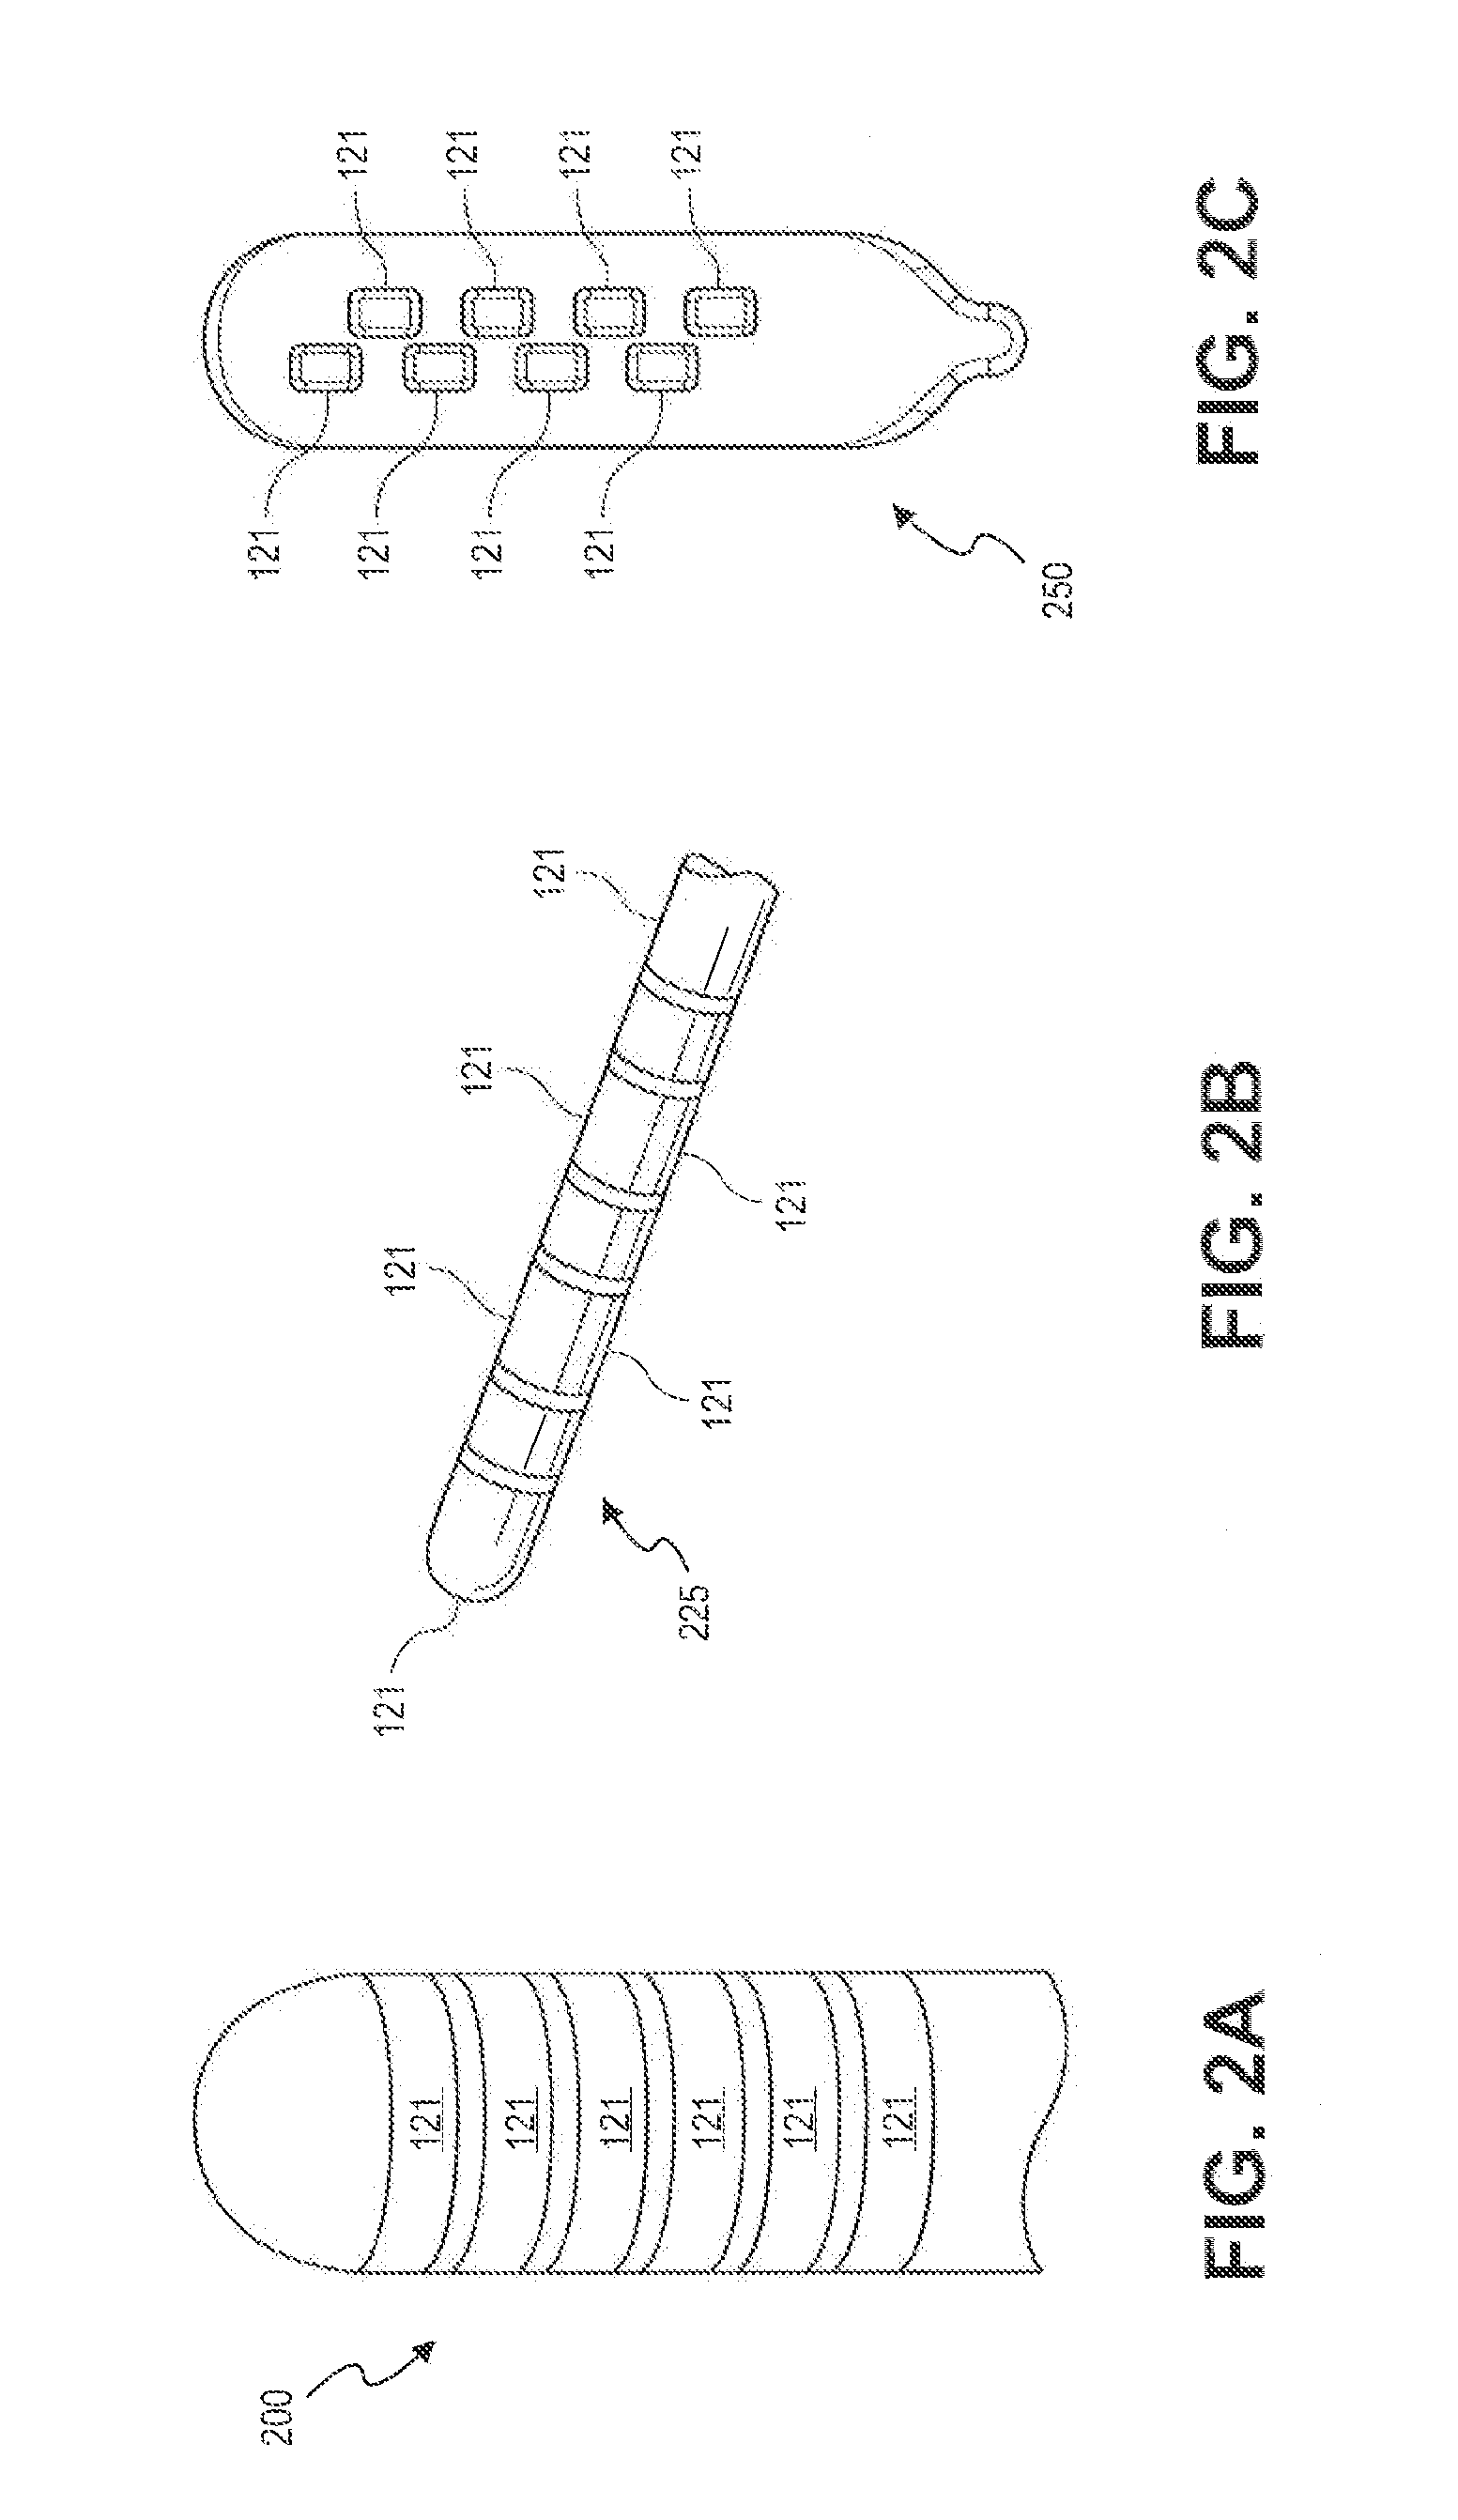 System and method for dorsal root block during spinal cord stimulation